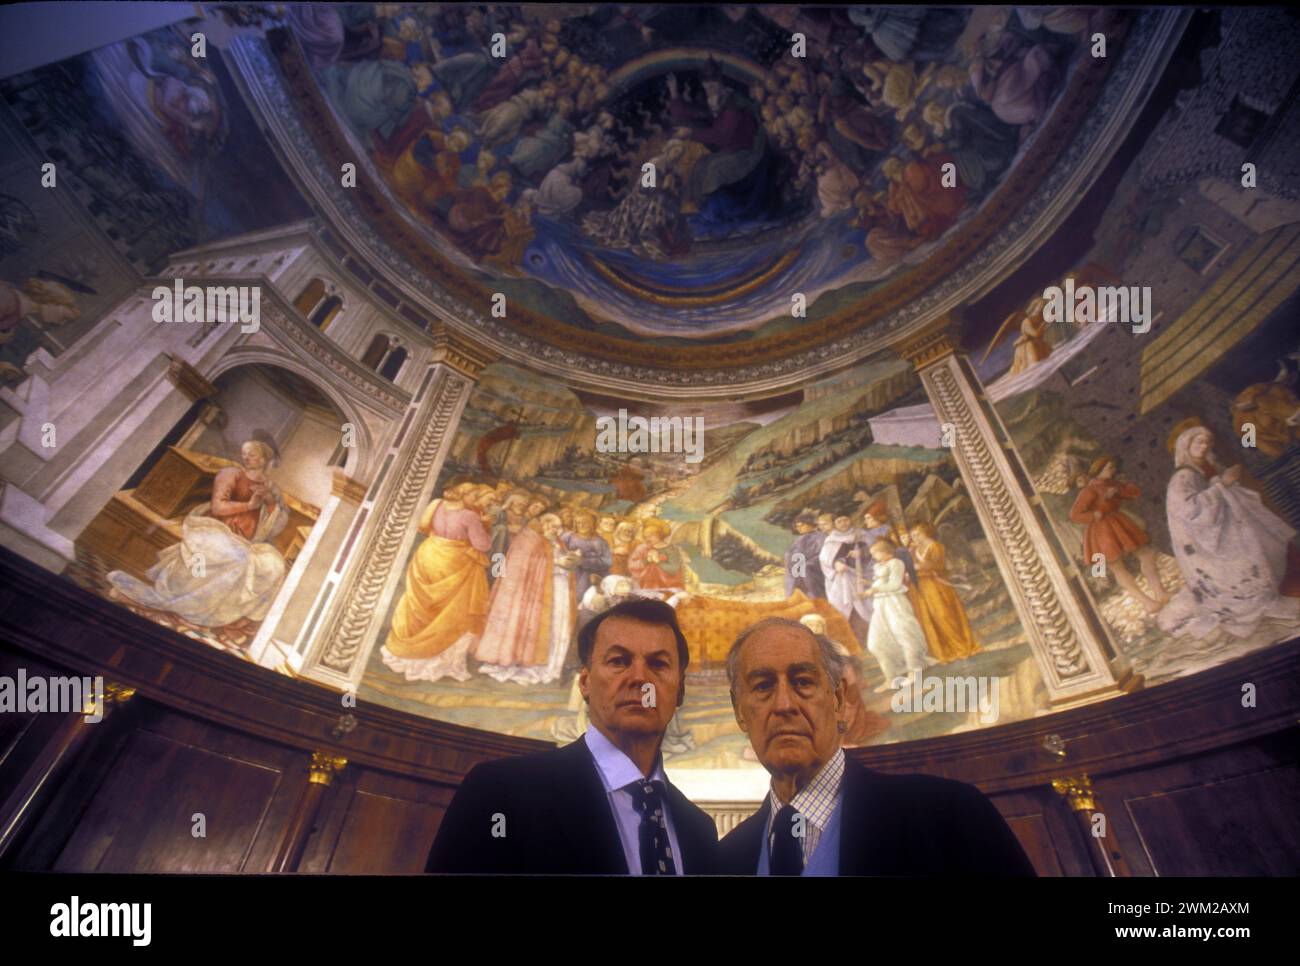 MME4812352 Spoleto (Perugia), Festival of Two Worlds 1999. Francis Menotti (born Francis Phelan) and his adoptive father Gian Carlo Menotti, composer and founder of the festival in the Spoleto Cathedral (frescos by Filippo Lippi)/Spoleto (Perugia), Festival dei due mondi 1999. Francis Menotti (nato Francis Phelan) with his padre adottivo Gian Carlo Menotti, composer and founder of the festival, nel Duomo di Spoleto (affreschi di Filippo Lippi) -; (add.info.: Spoleto (Perugia), Festival of Two Worlds 1999. Francis Menotti (born Francis Phelan) and his adoptive father Gian Carlo Menotti, compose Stock Photo